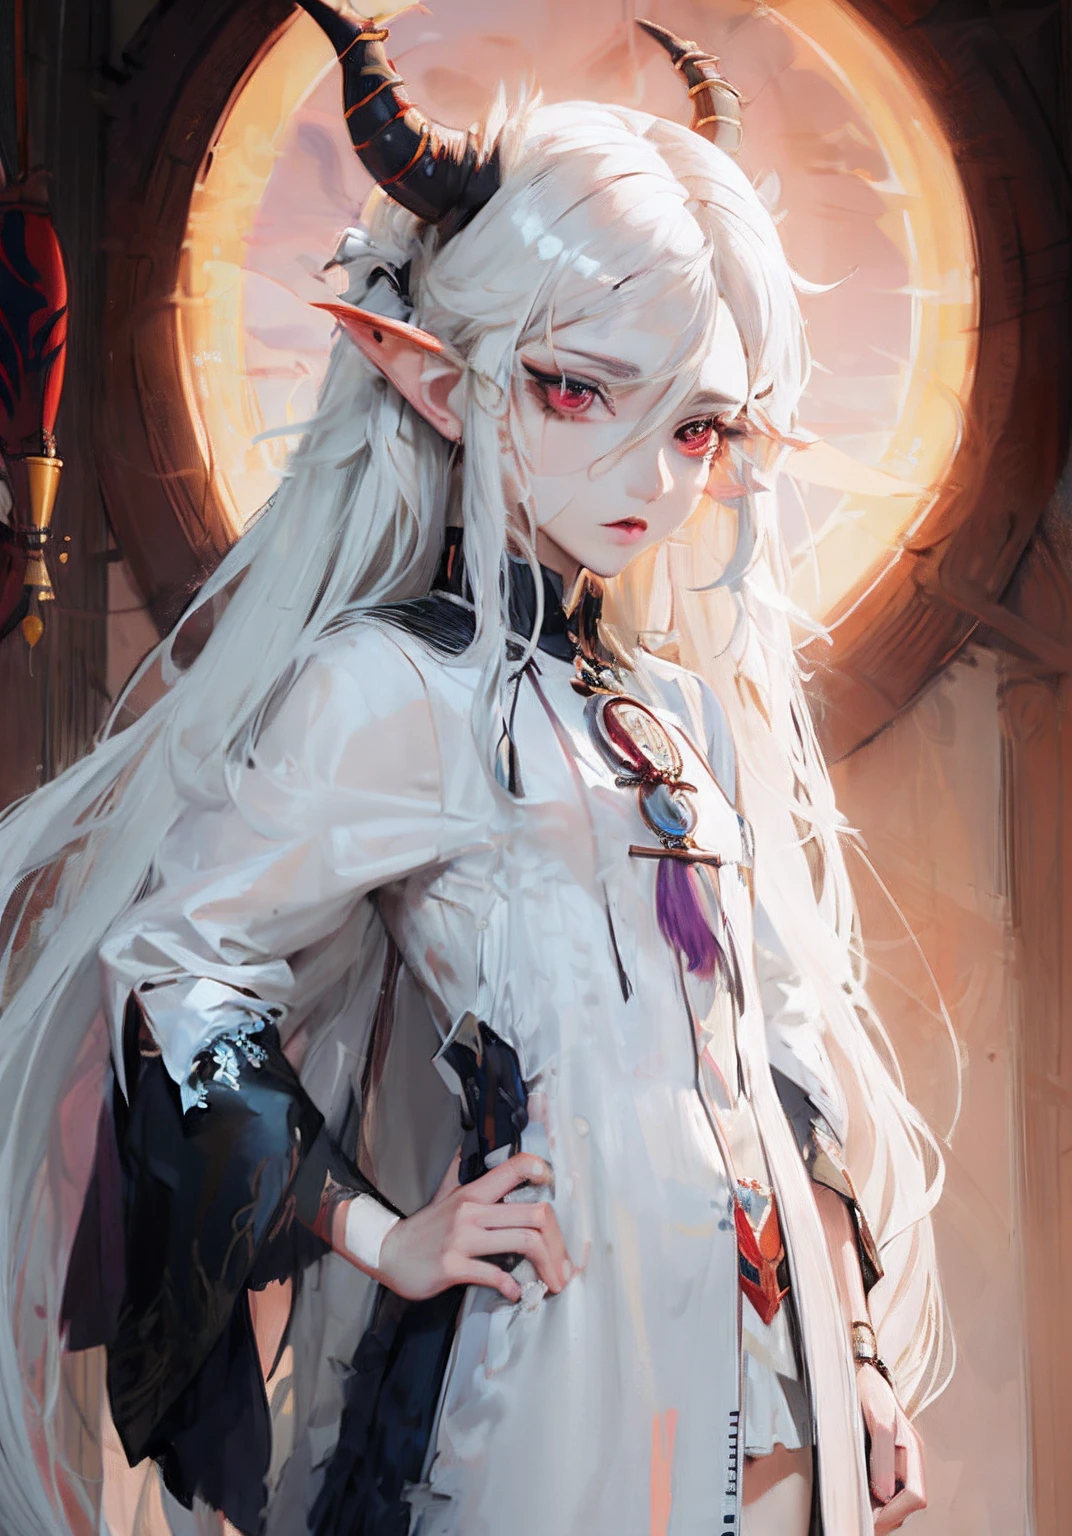 anime - style image of a men with long white hair and horns, white haired deity, anime style 4 k, detailed digital anime art, 2. 5 d cgi anime fantasy artwork, anime art wallpaper 4k, anime art wallpaper 4 k, anime art wallpaper 8 k, anime fantasy artwork, anime in fantasy style, anime fantasy illustration, detailed anime character art, boy dragon, style semi realistc, mescle images